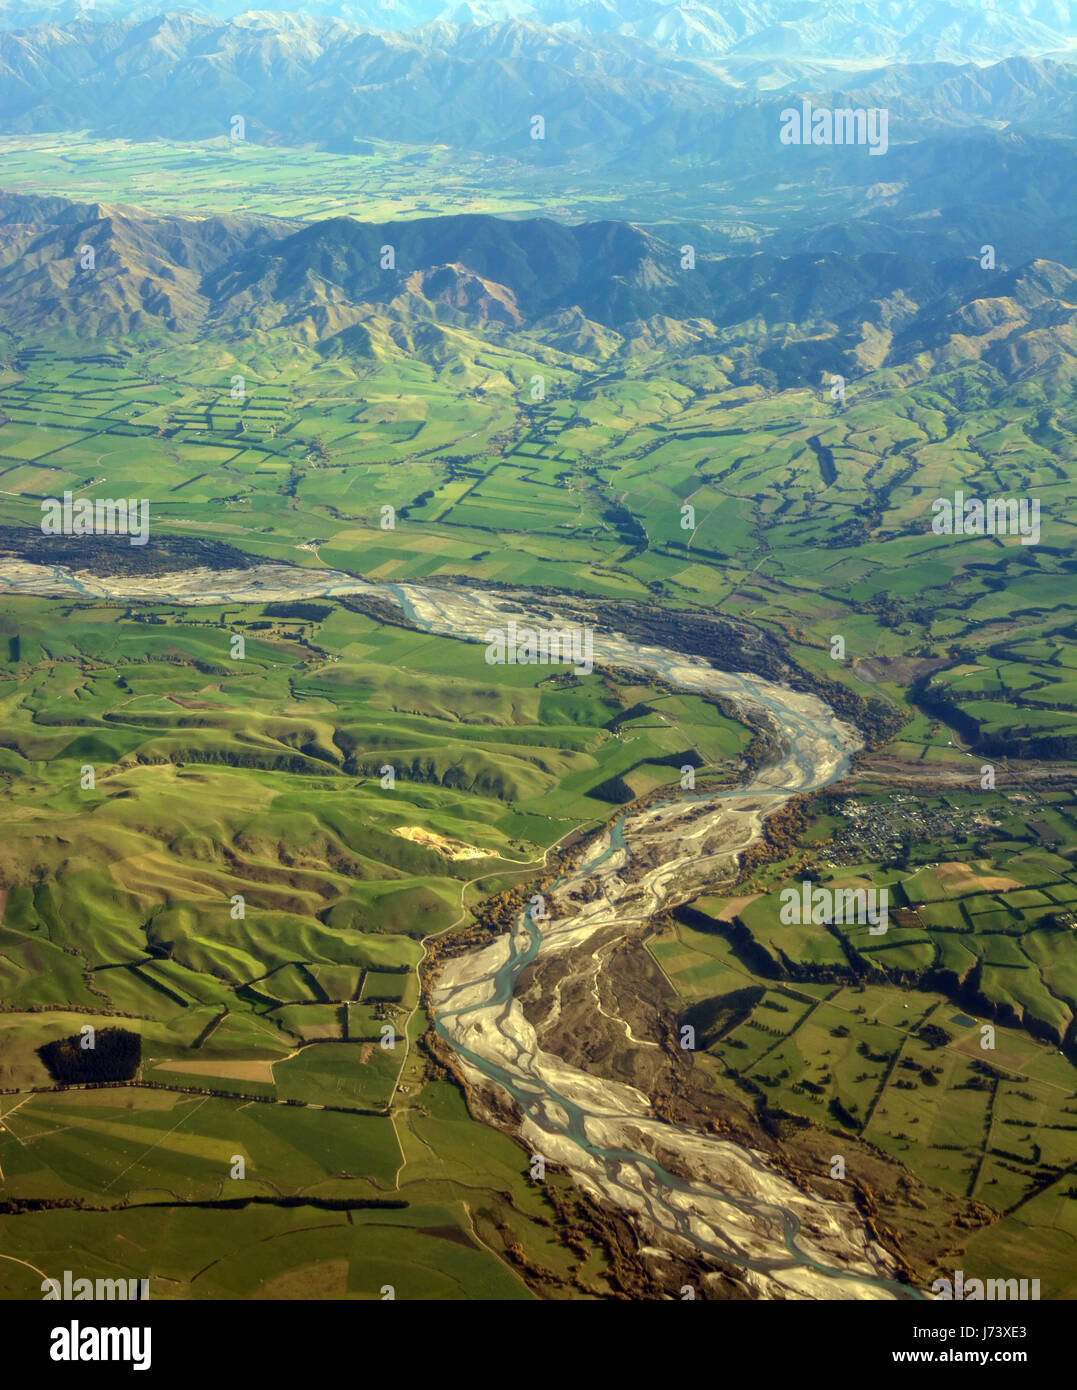 Aerial View of the Waiau River, North Canterbury, New Zealand. In the foreground is Waiau township and in the background is Hanmer and farms. Stock Photo